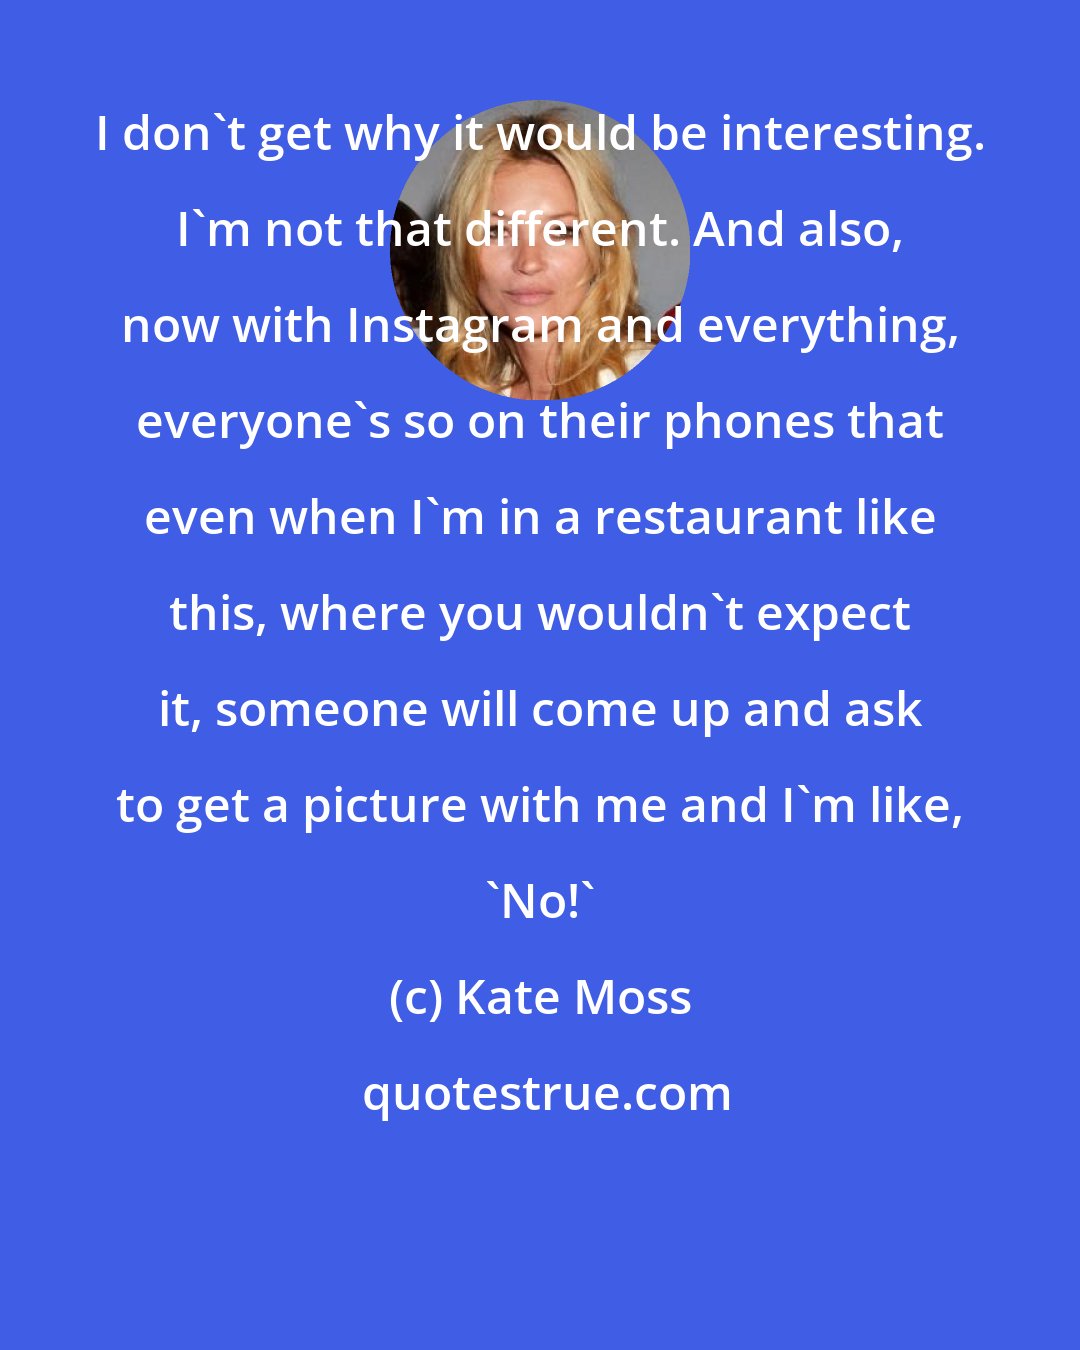 Kate Moss: I don't get why it would be interesting. I'm not that different. And also, now with Instagram and everything, everyone's so on their phones that even when I'm in a restaurant like this, where you wouldn't expect it, someone will come up and ask to get a picture with me and I'm like, 'No!'